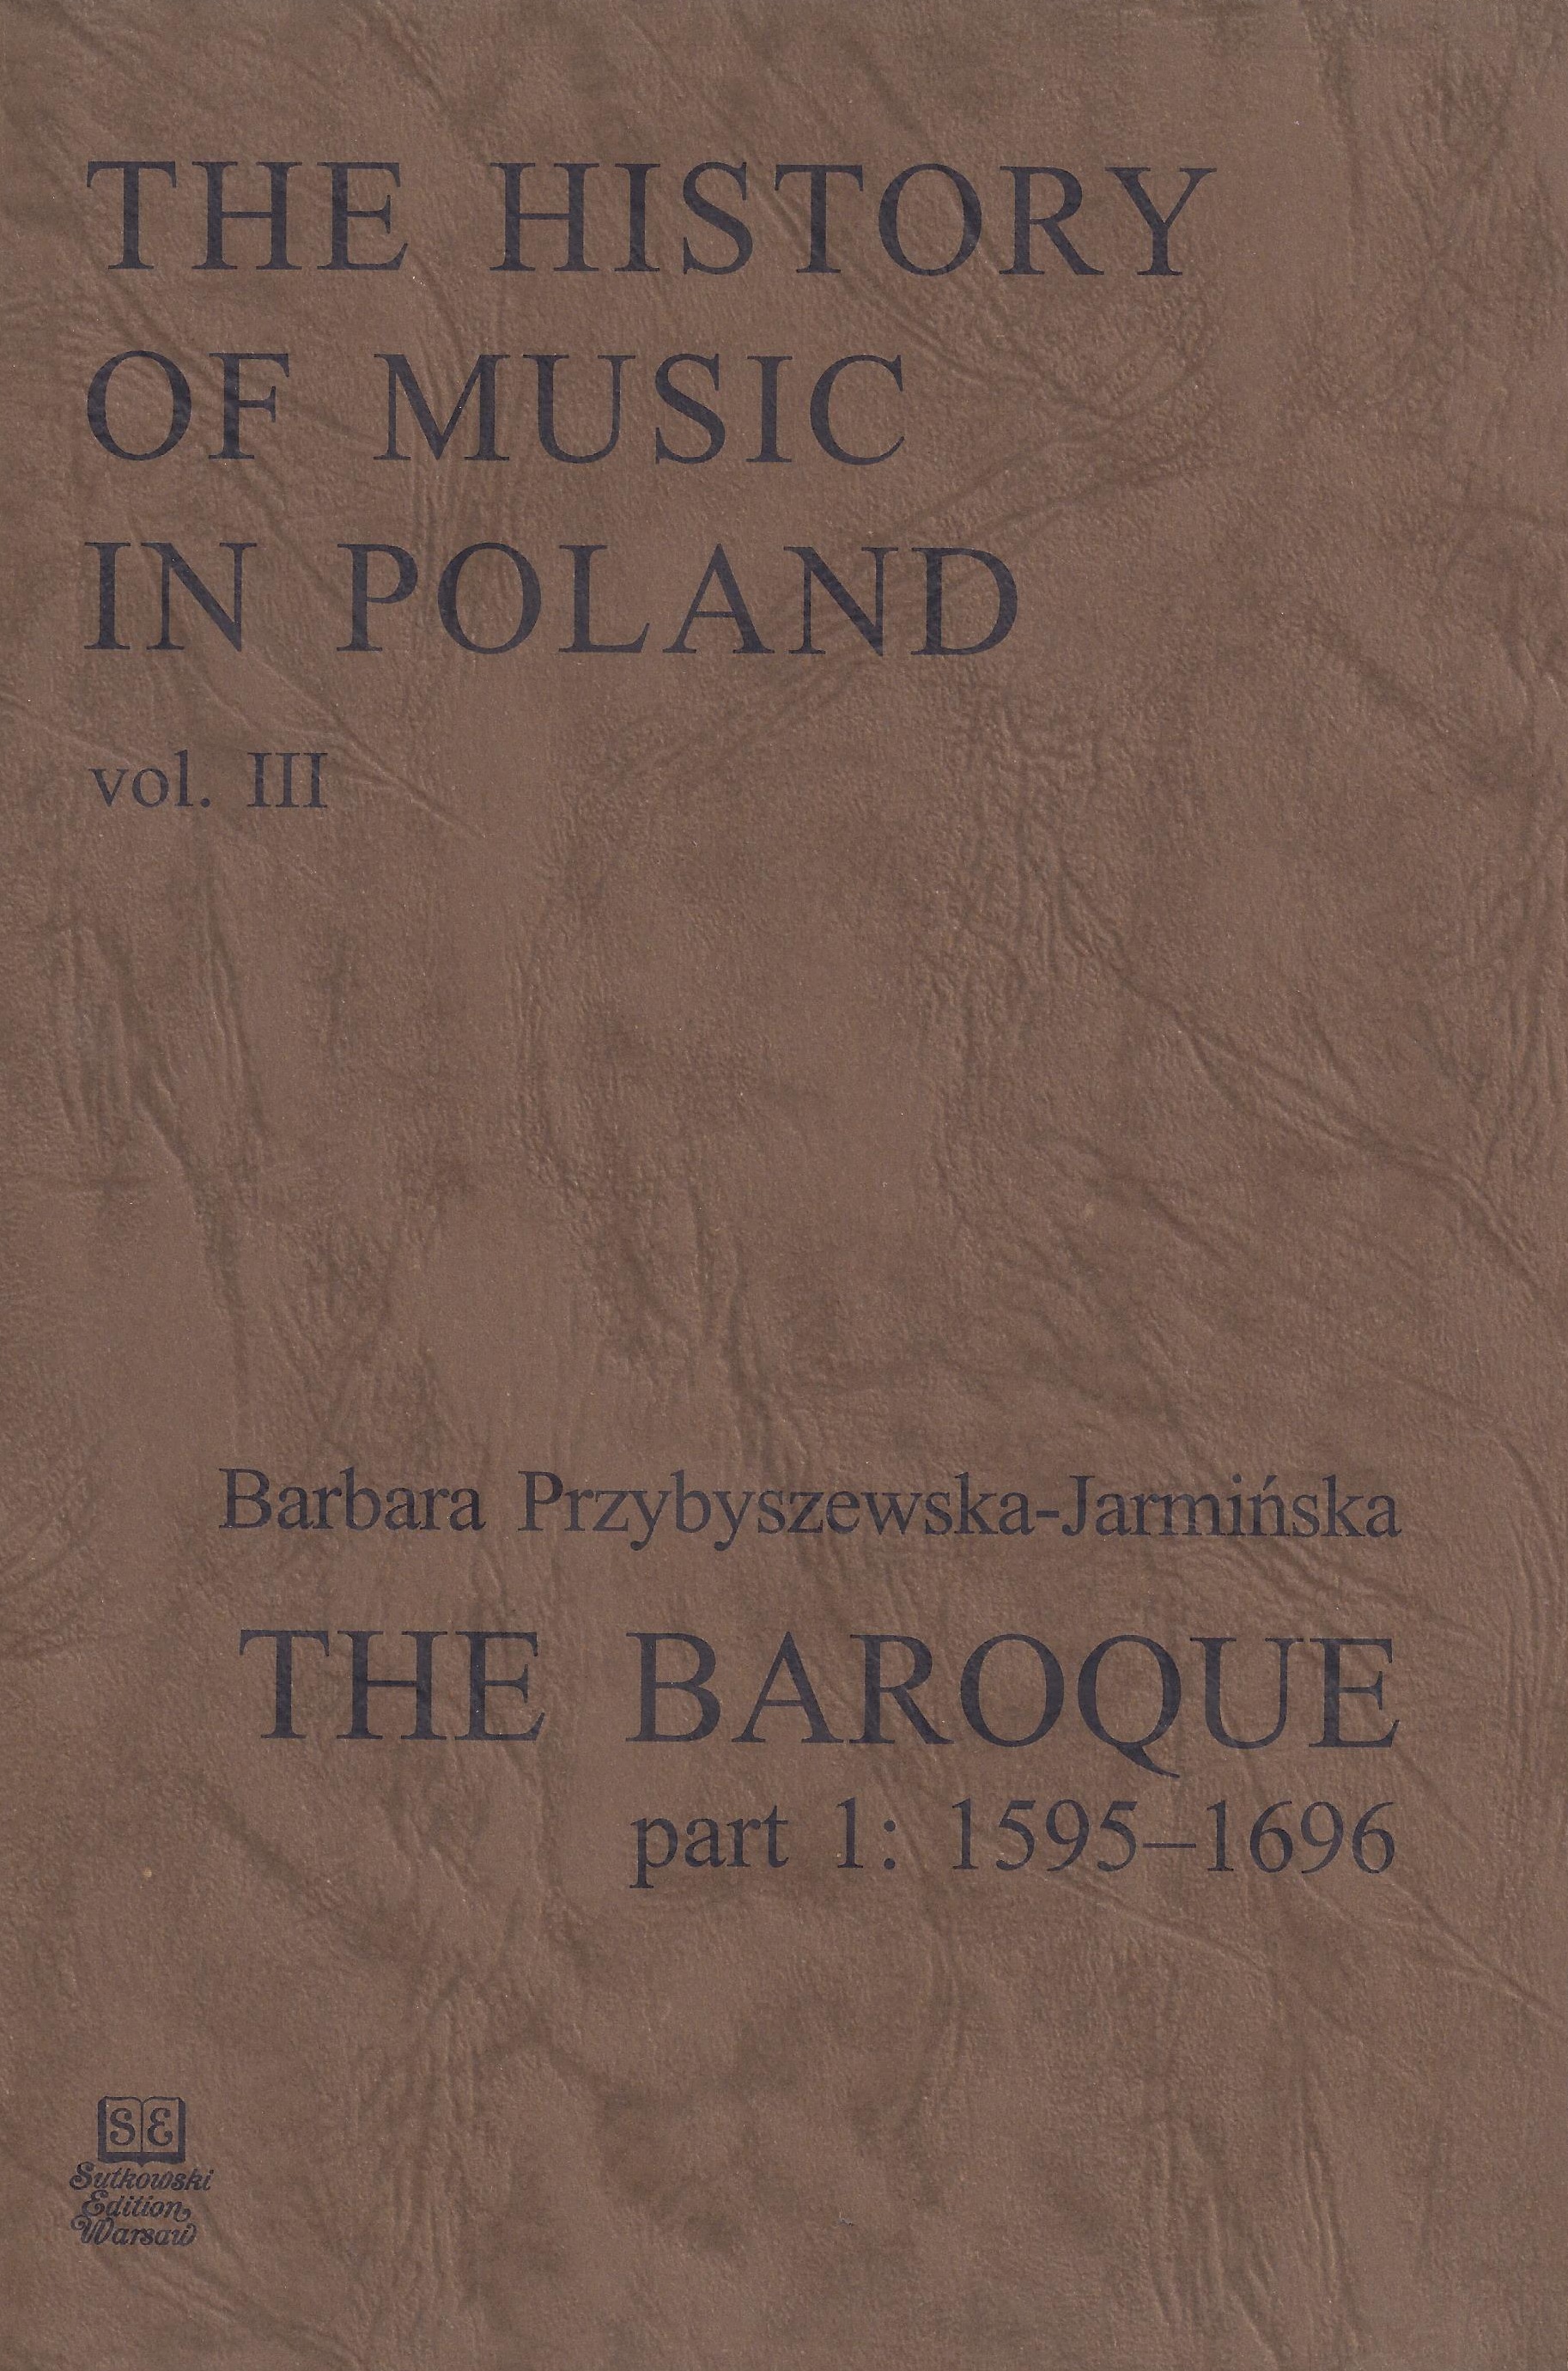 The History of Music in Poland vol III Part 1 – The Baroque (1595-1696)